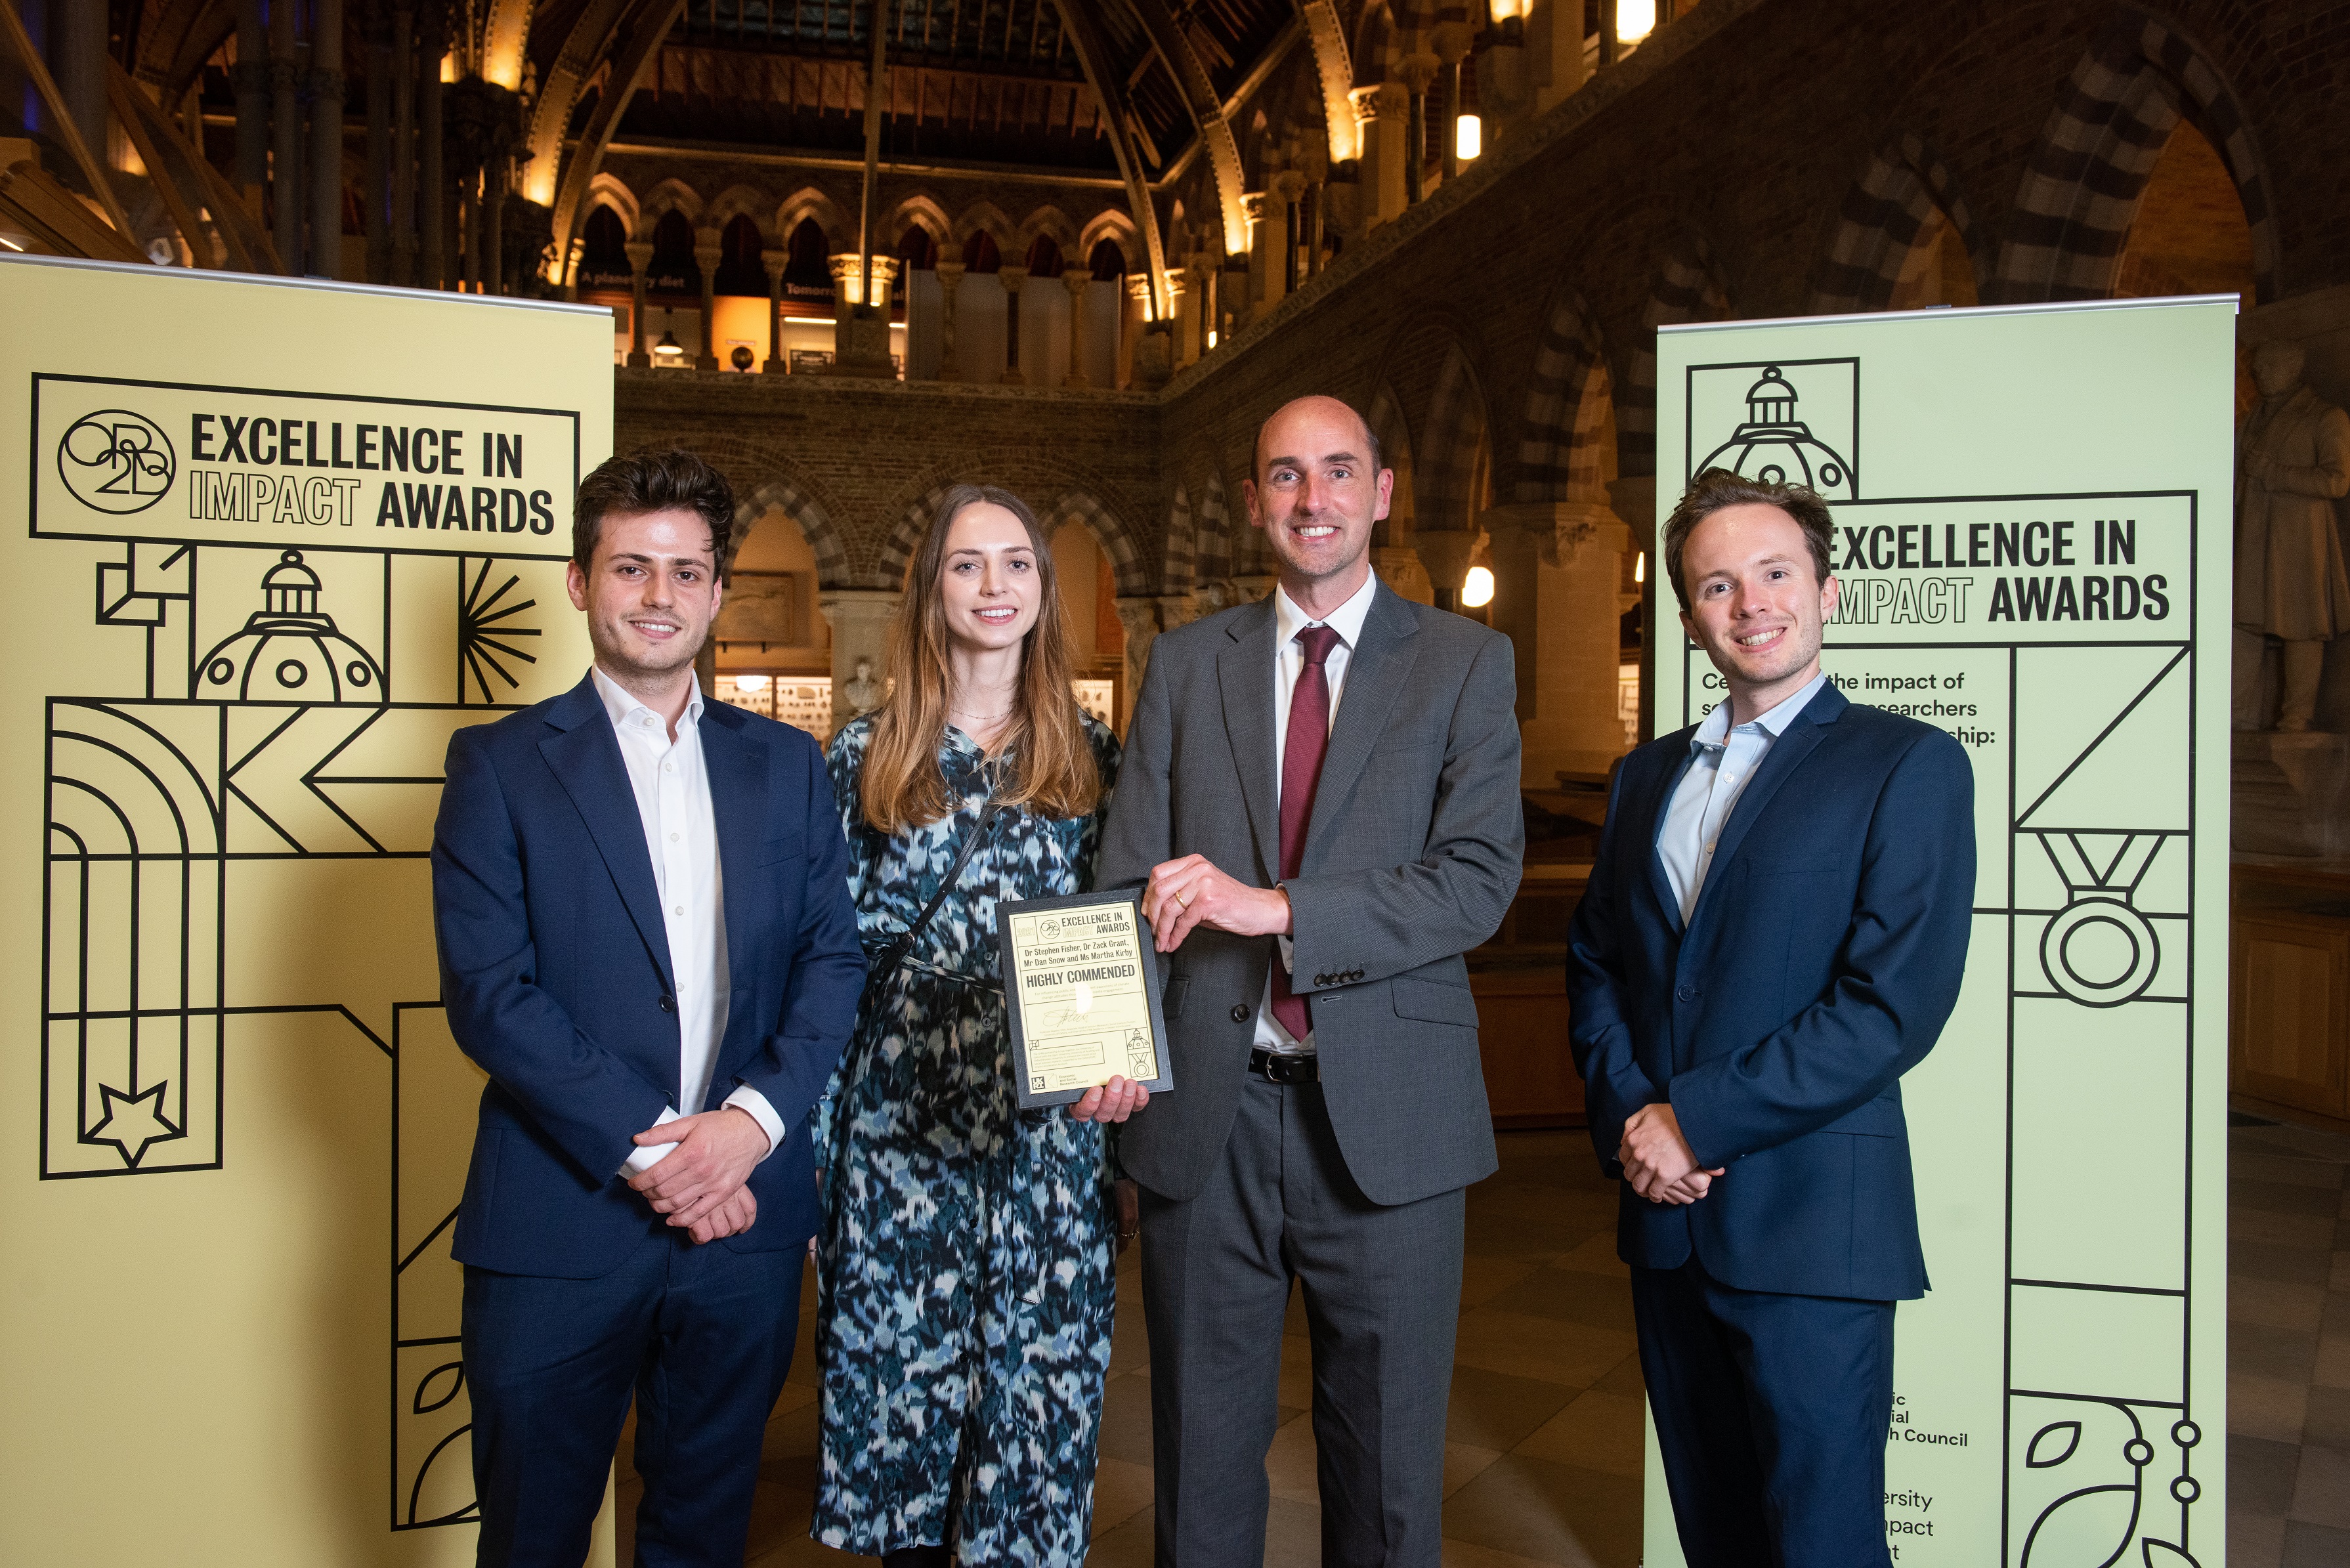 Mr Dan Snow, Ms Martha Kirby, Dr Stephen Fisher and Dr Zack Grant smile as they hold their Highly Commended certificate, flanked by impact awards branding at the Museum of Natural History